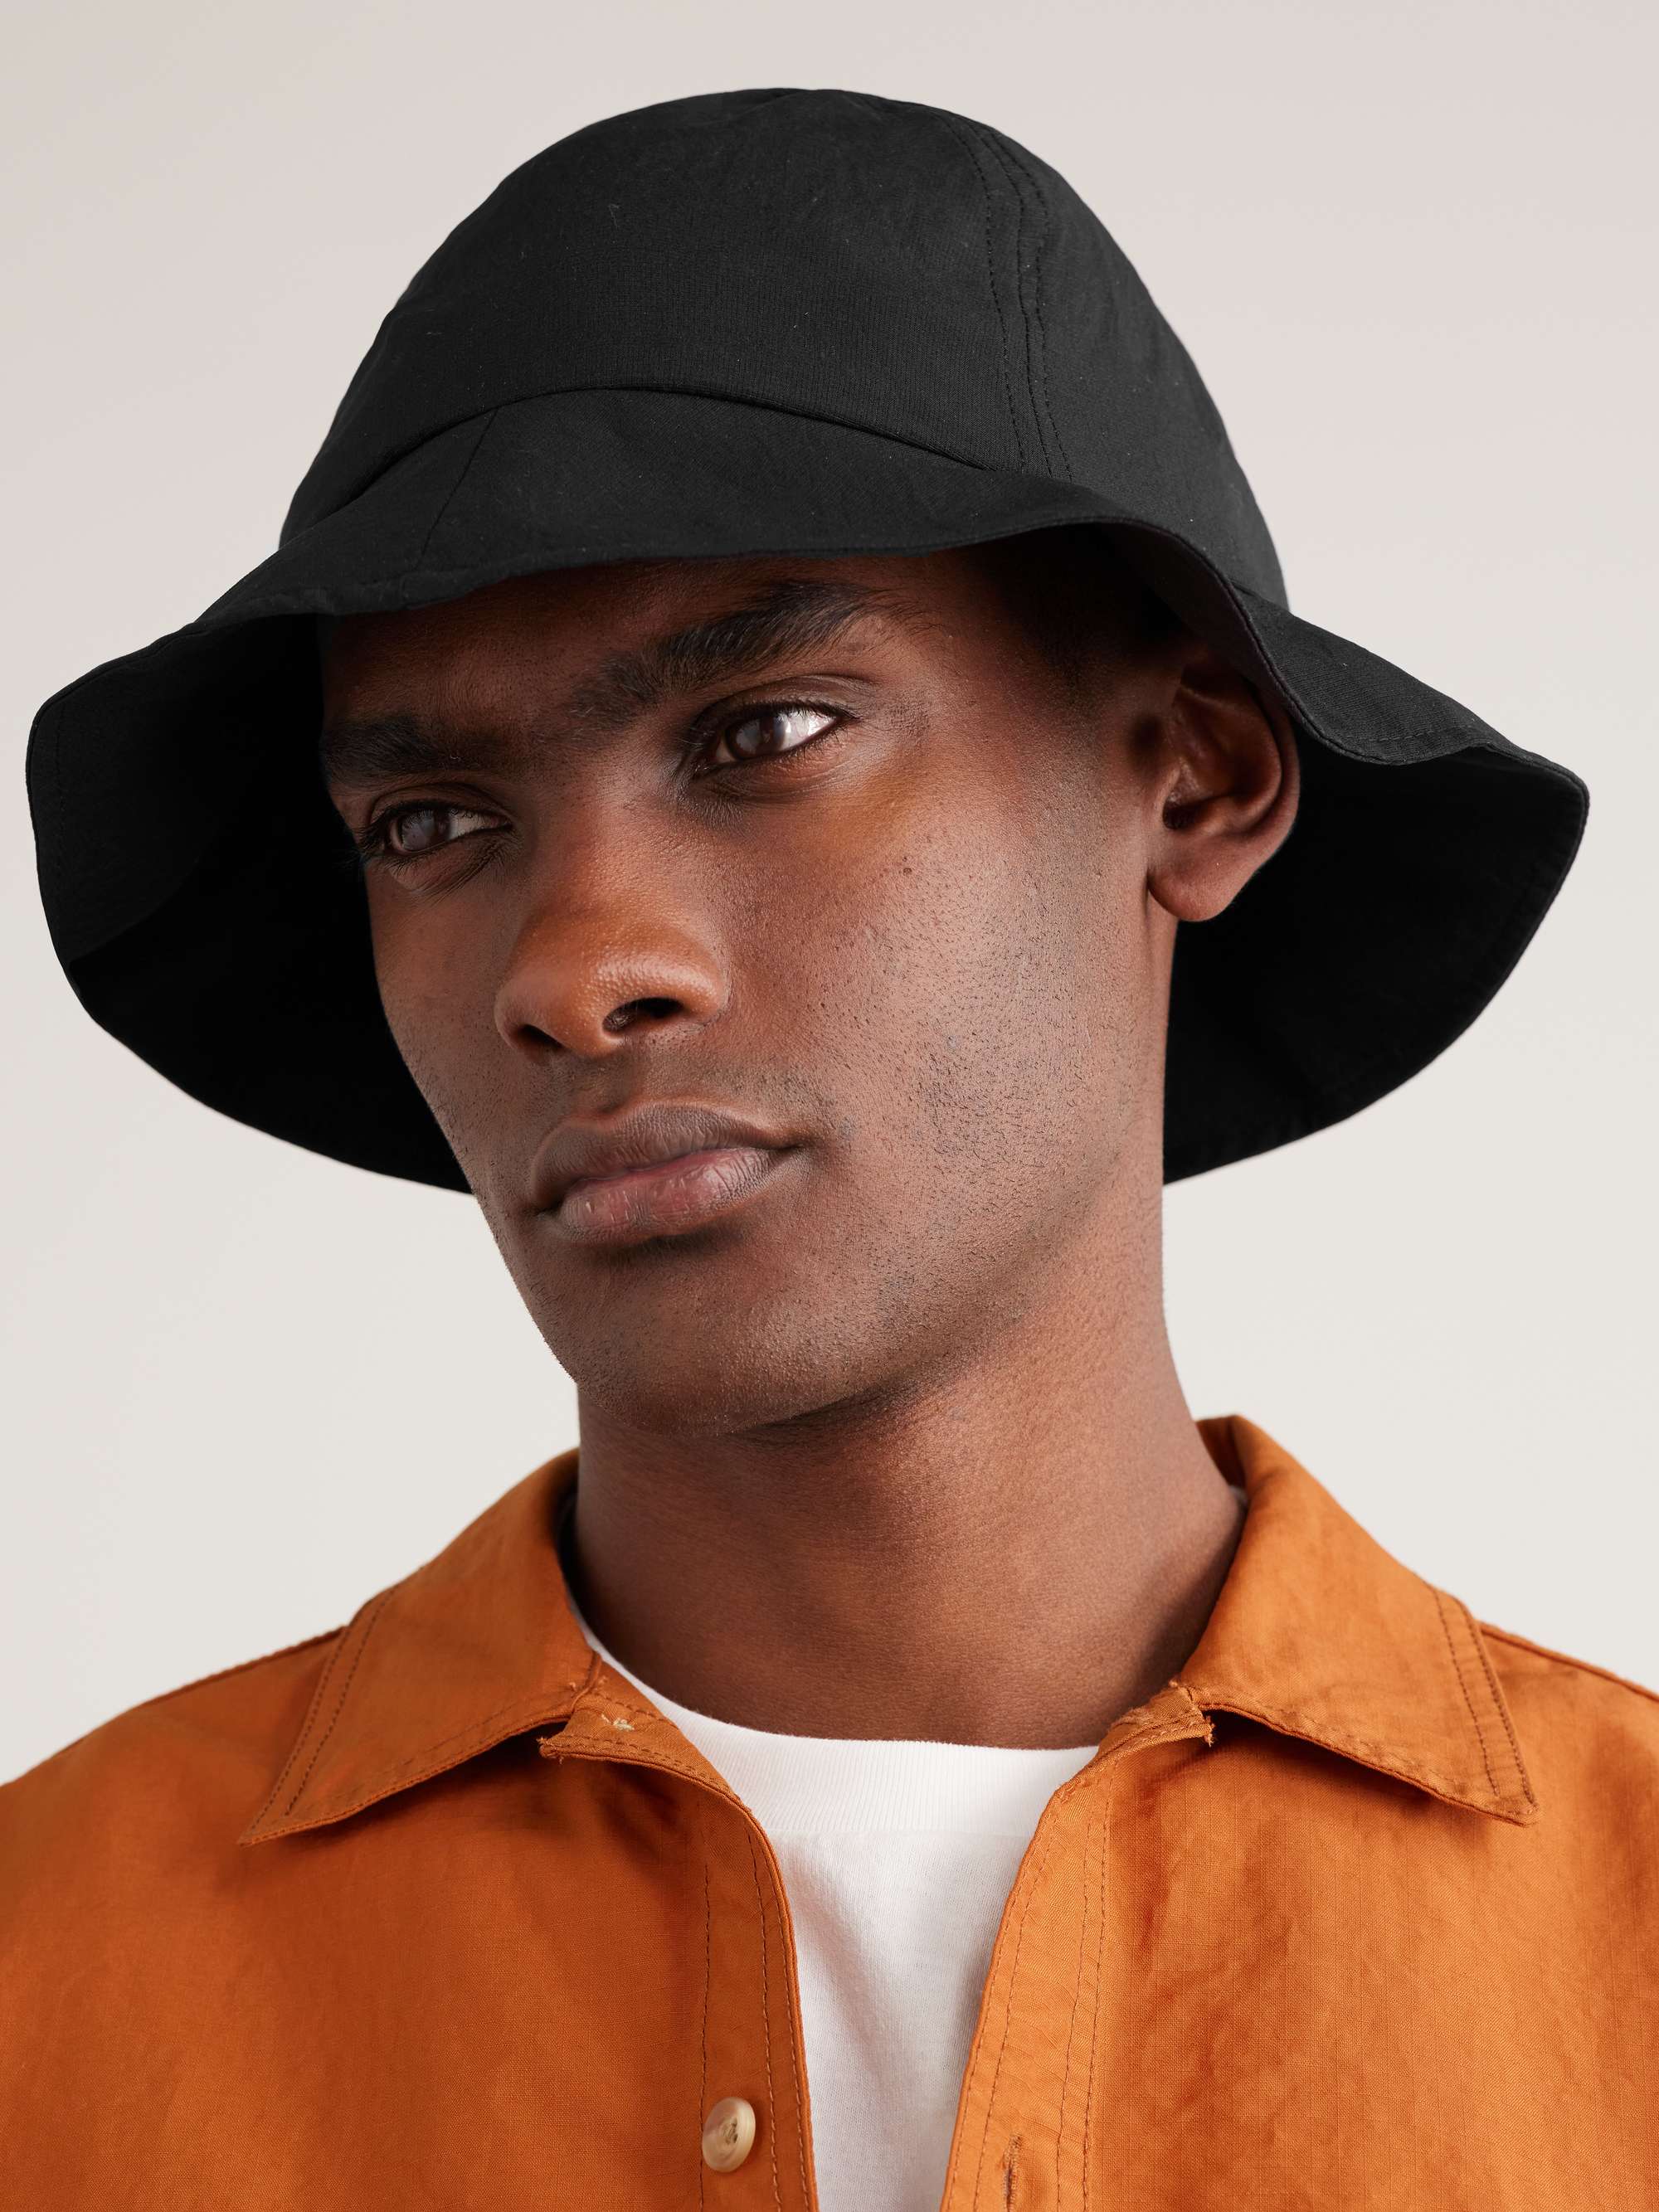 SNOW PEAK Breathable Quick Dry Shell Bucket Hat for Men